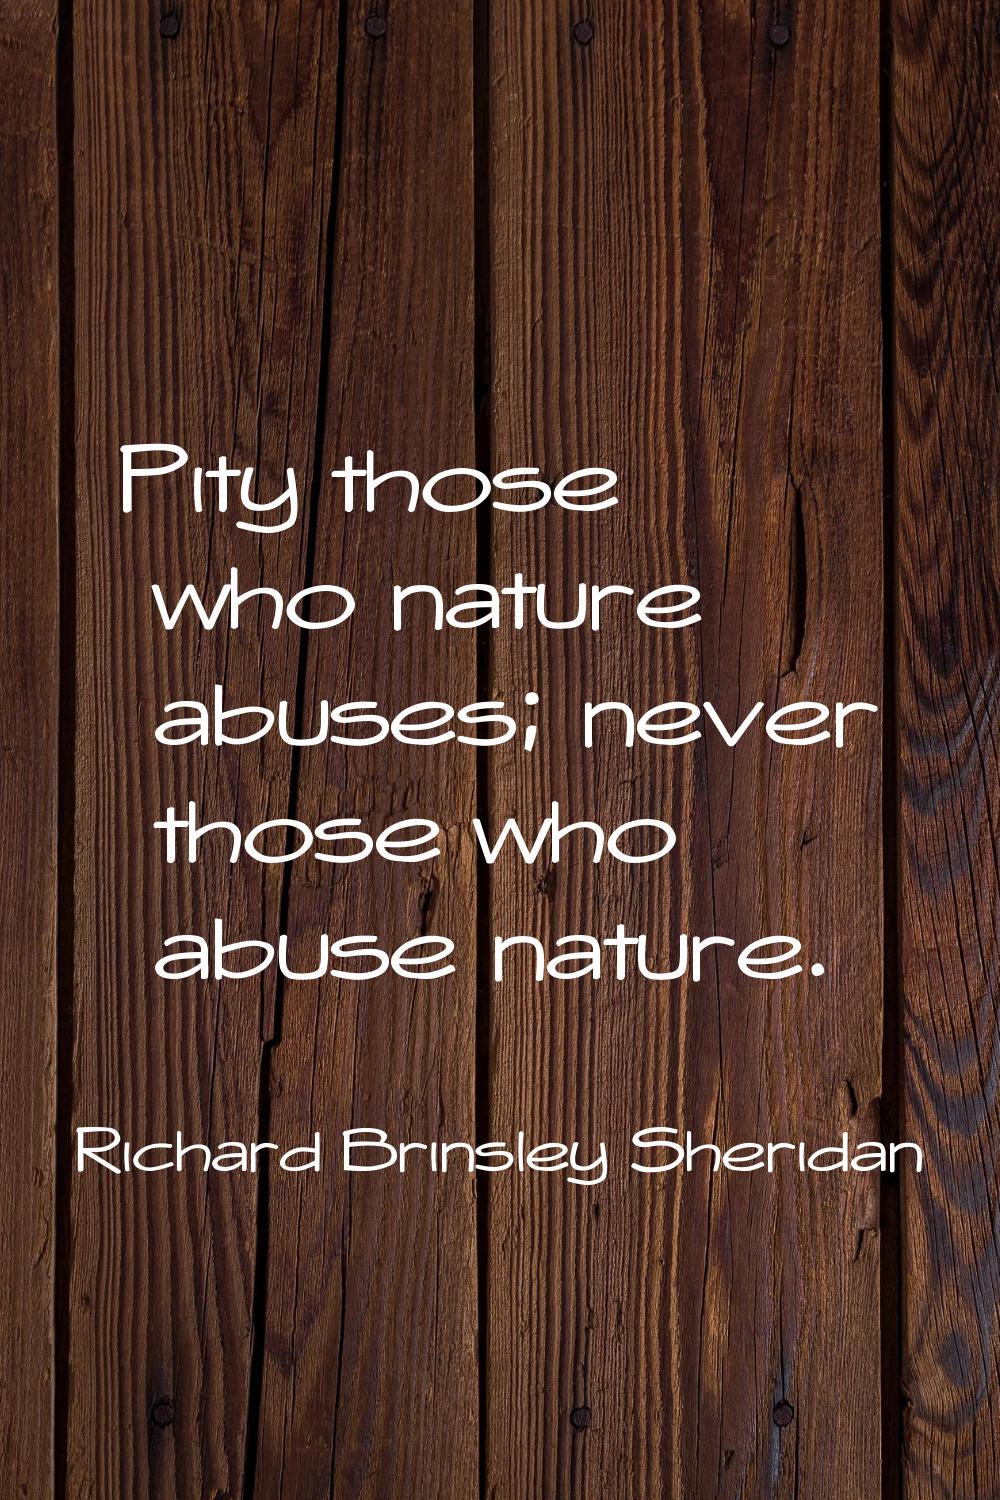 Pity those who nature abuses; never those who abuse nature.